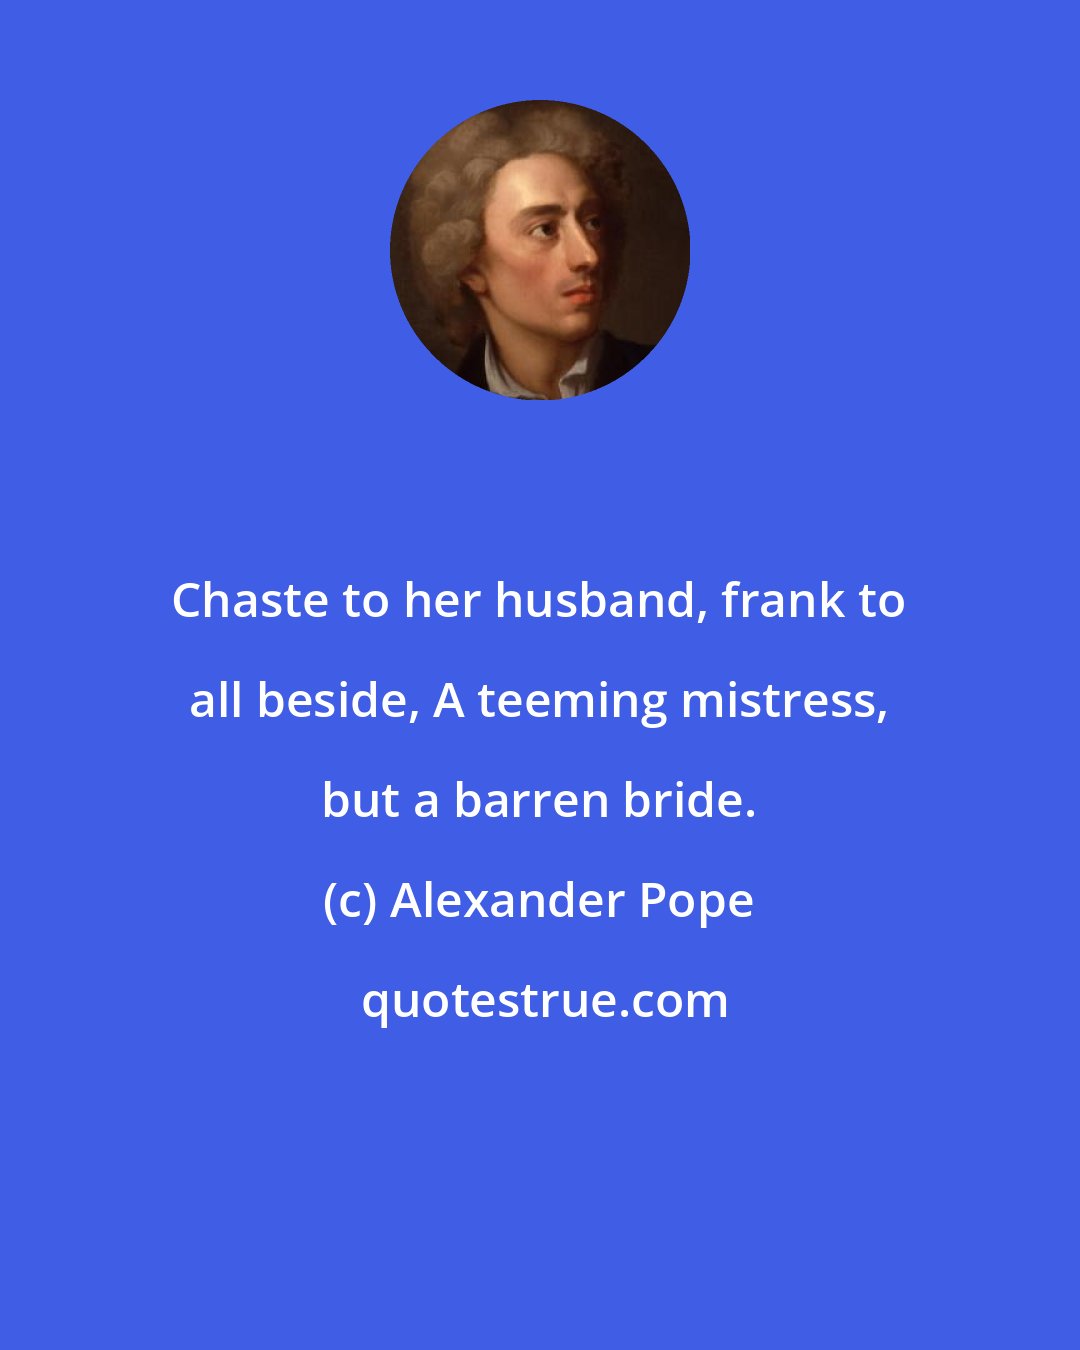 Alexander Pope: Chaste to her husband, frank to all beside, A teeming mistress, but a barren bride.